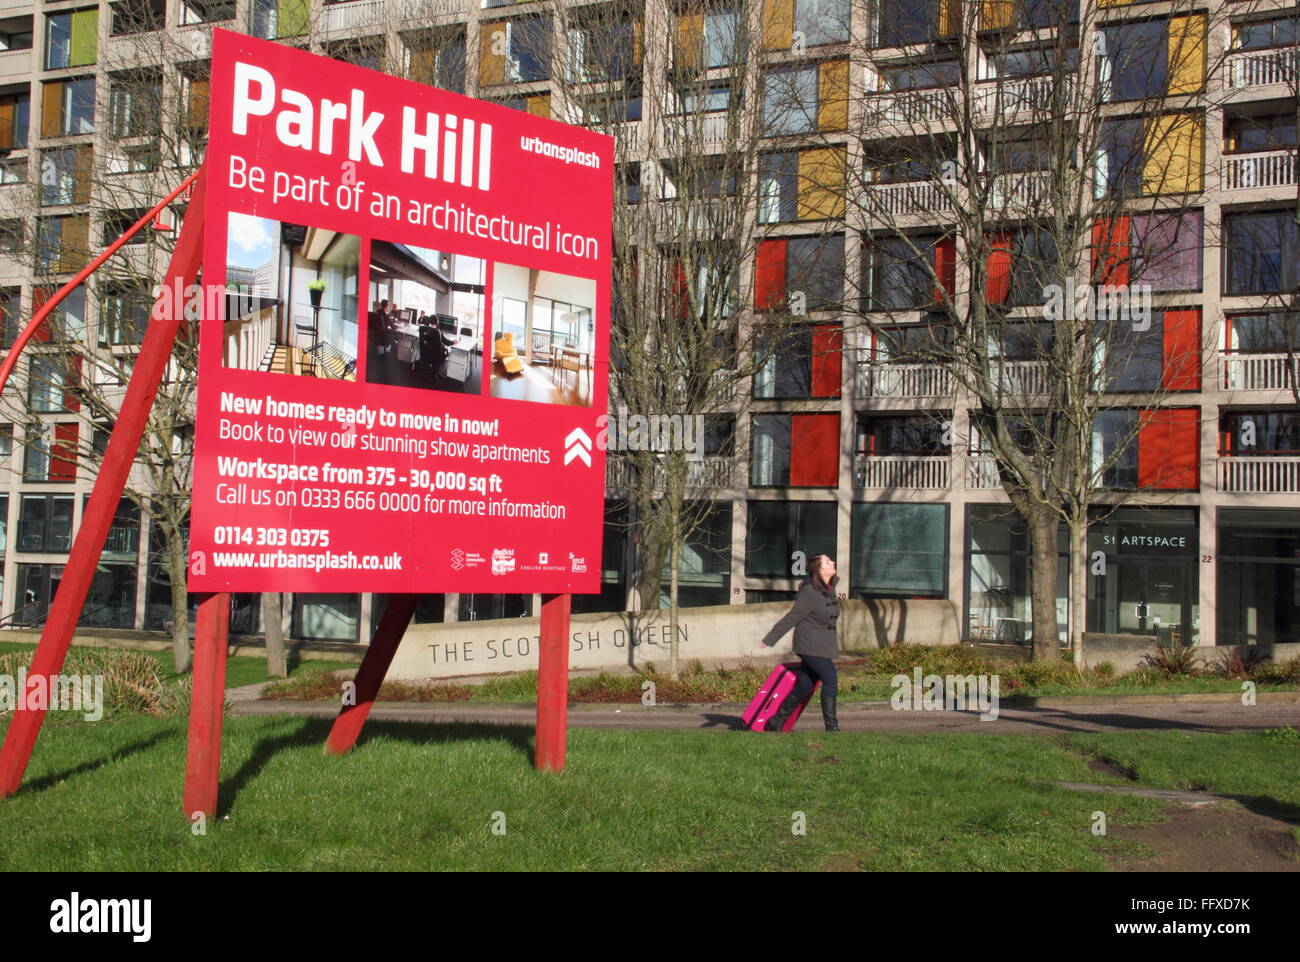 A sales sign outside Park Hill housing estate (pictured), Sheffield, invites people to 'be part of an architectural icon' - 2016. UK Stock Photo